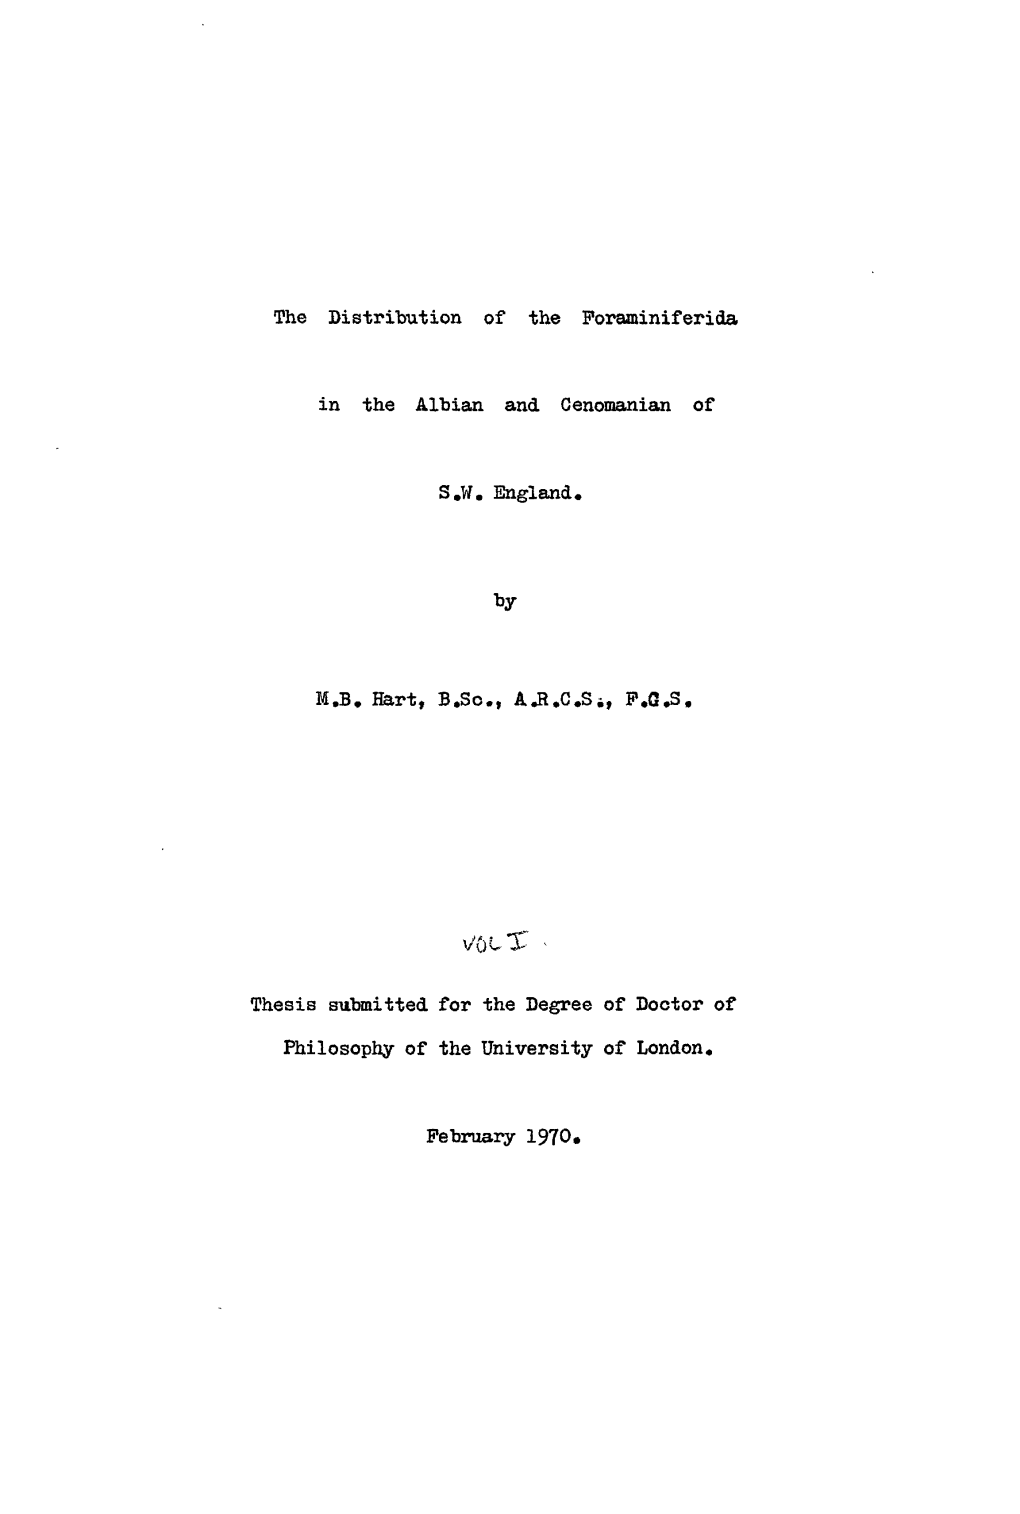 The Distribution of the Foraminiferida in the Albian and Cenomanian of S.W. England. by M.B. Hart, B.So., F.C.S. Thesis Submitt